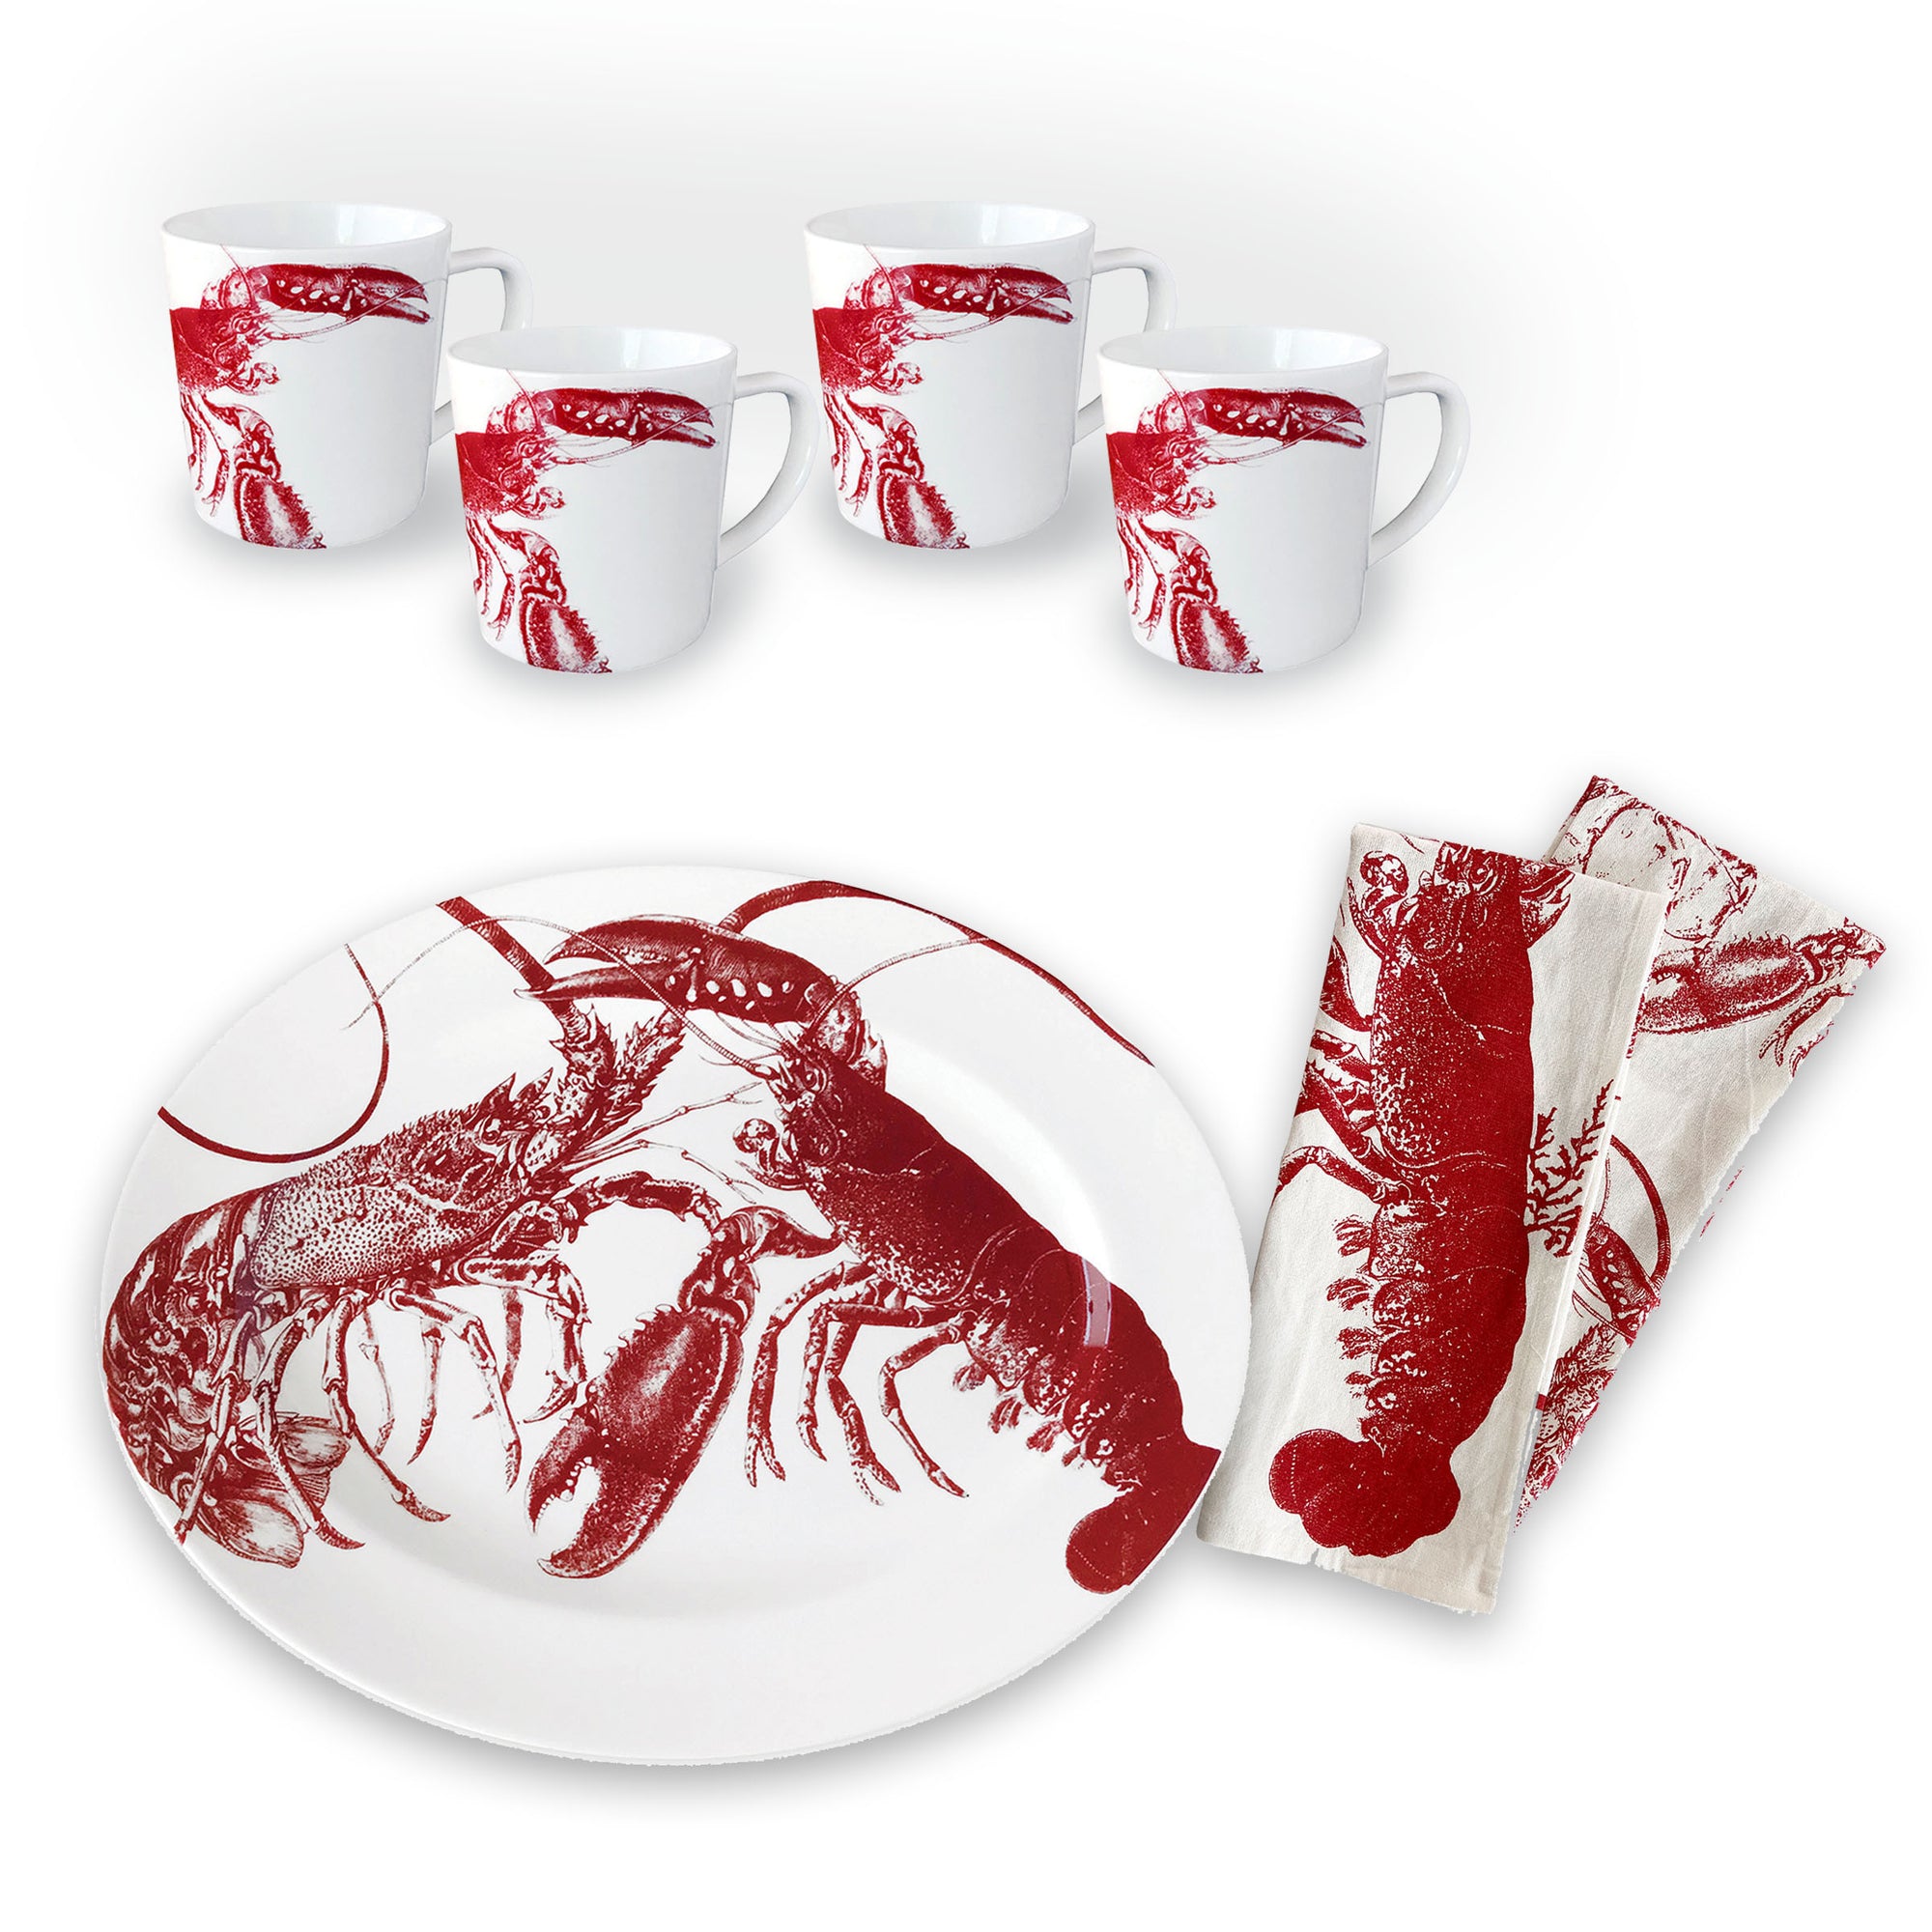 A set of tableware featuring charming red lobster designs, including four lobster mugs, a large lobster platter, and two cloth napkins is now available as the Father's Day Bundle from Caskata.